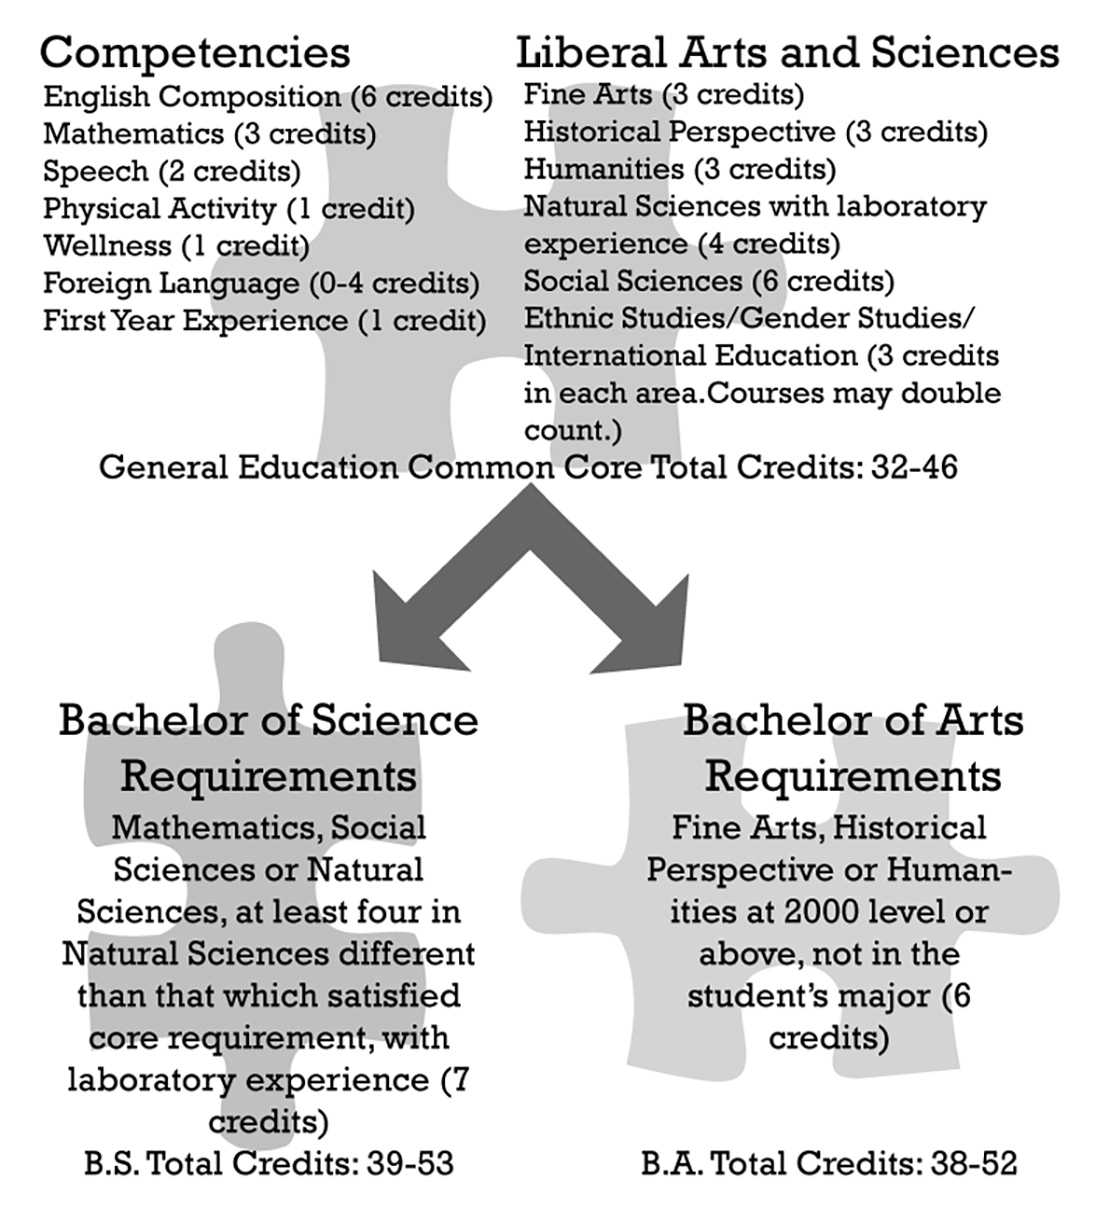 This infographic shows the recommended changes to the general education requirements.